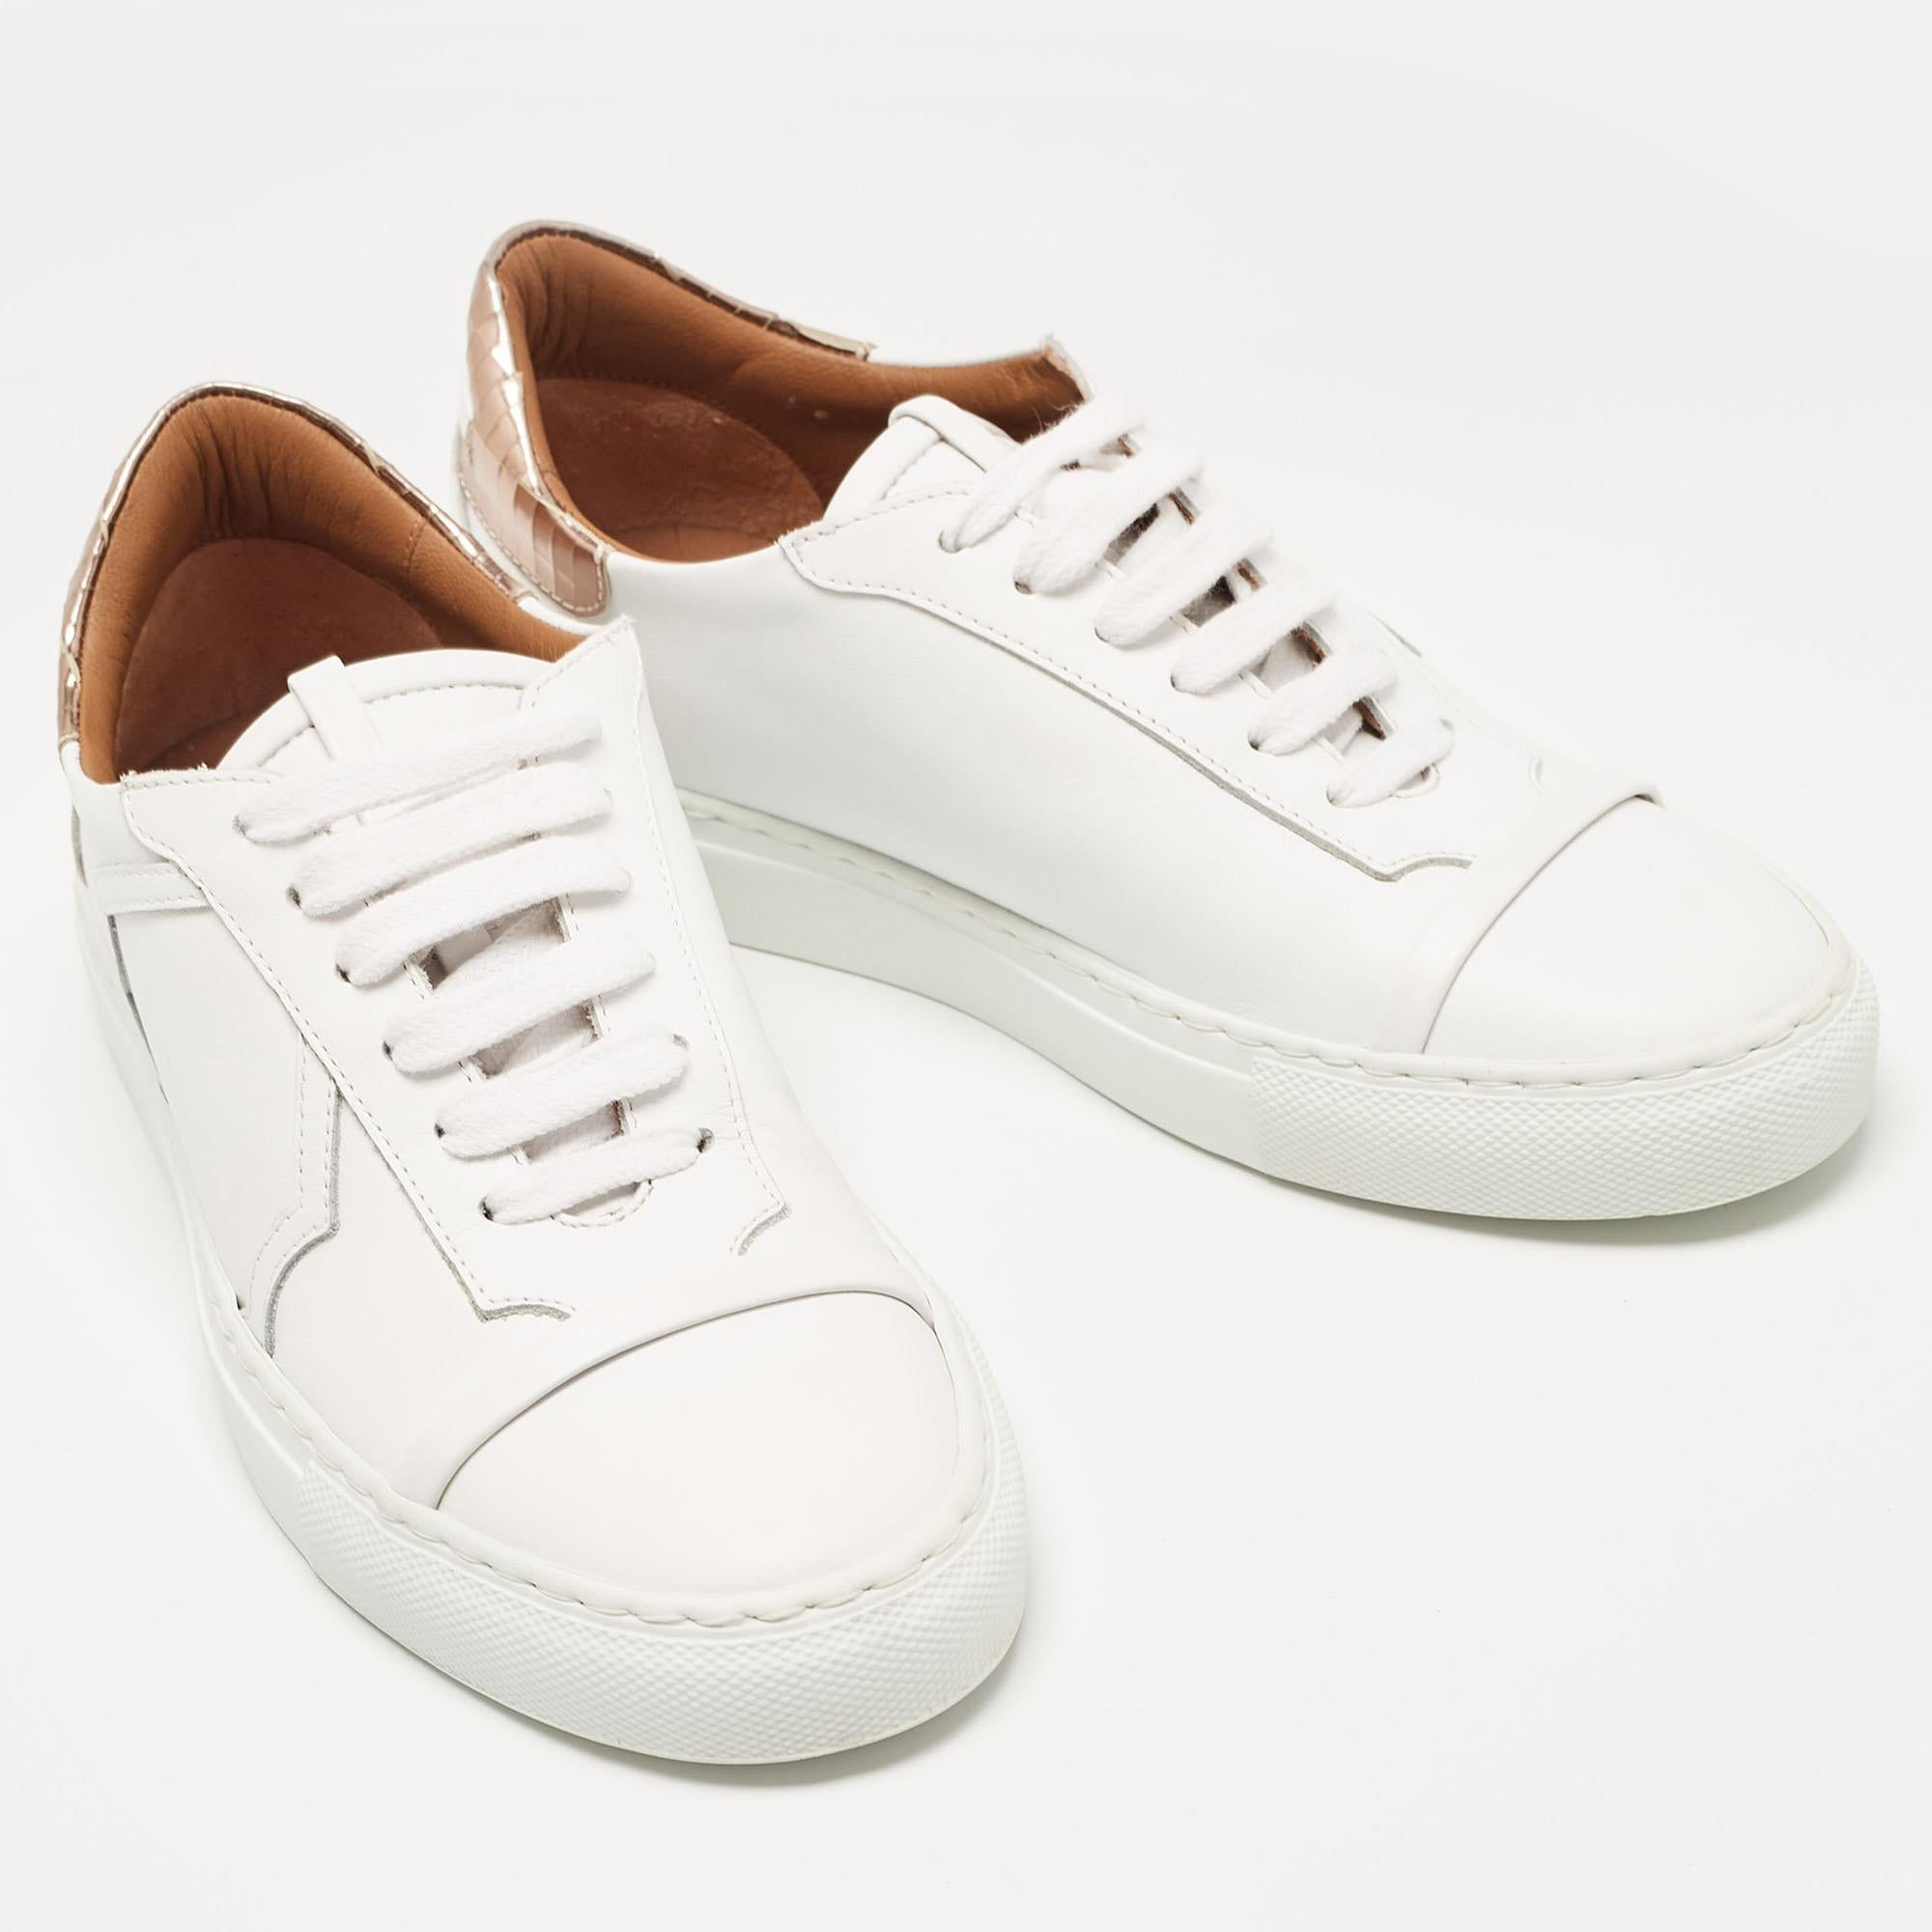 Malone Souliers White/Rose Gold Leather Musa Sneakers Size 36 For Sale 3